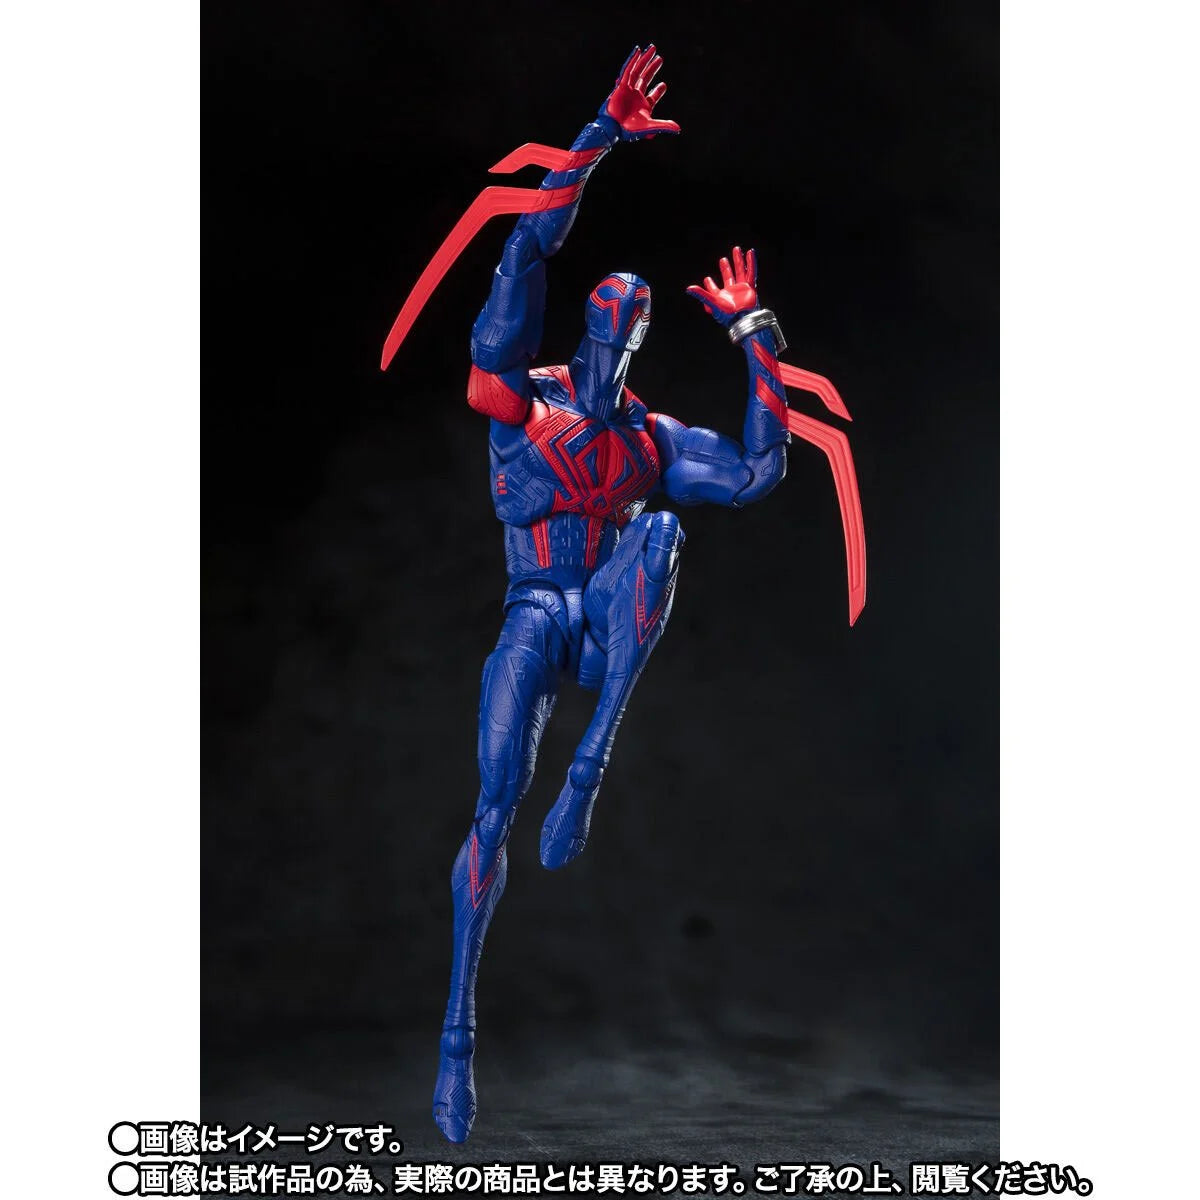 Spider-Man: Across the Spider-Verse Spider-Man 2099 Action Figure by S.H.Figuarts -SH Figuarts - India - www.superherotoystore.com